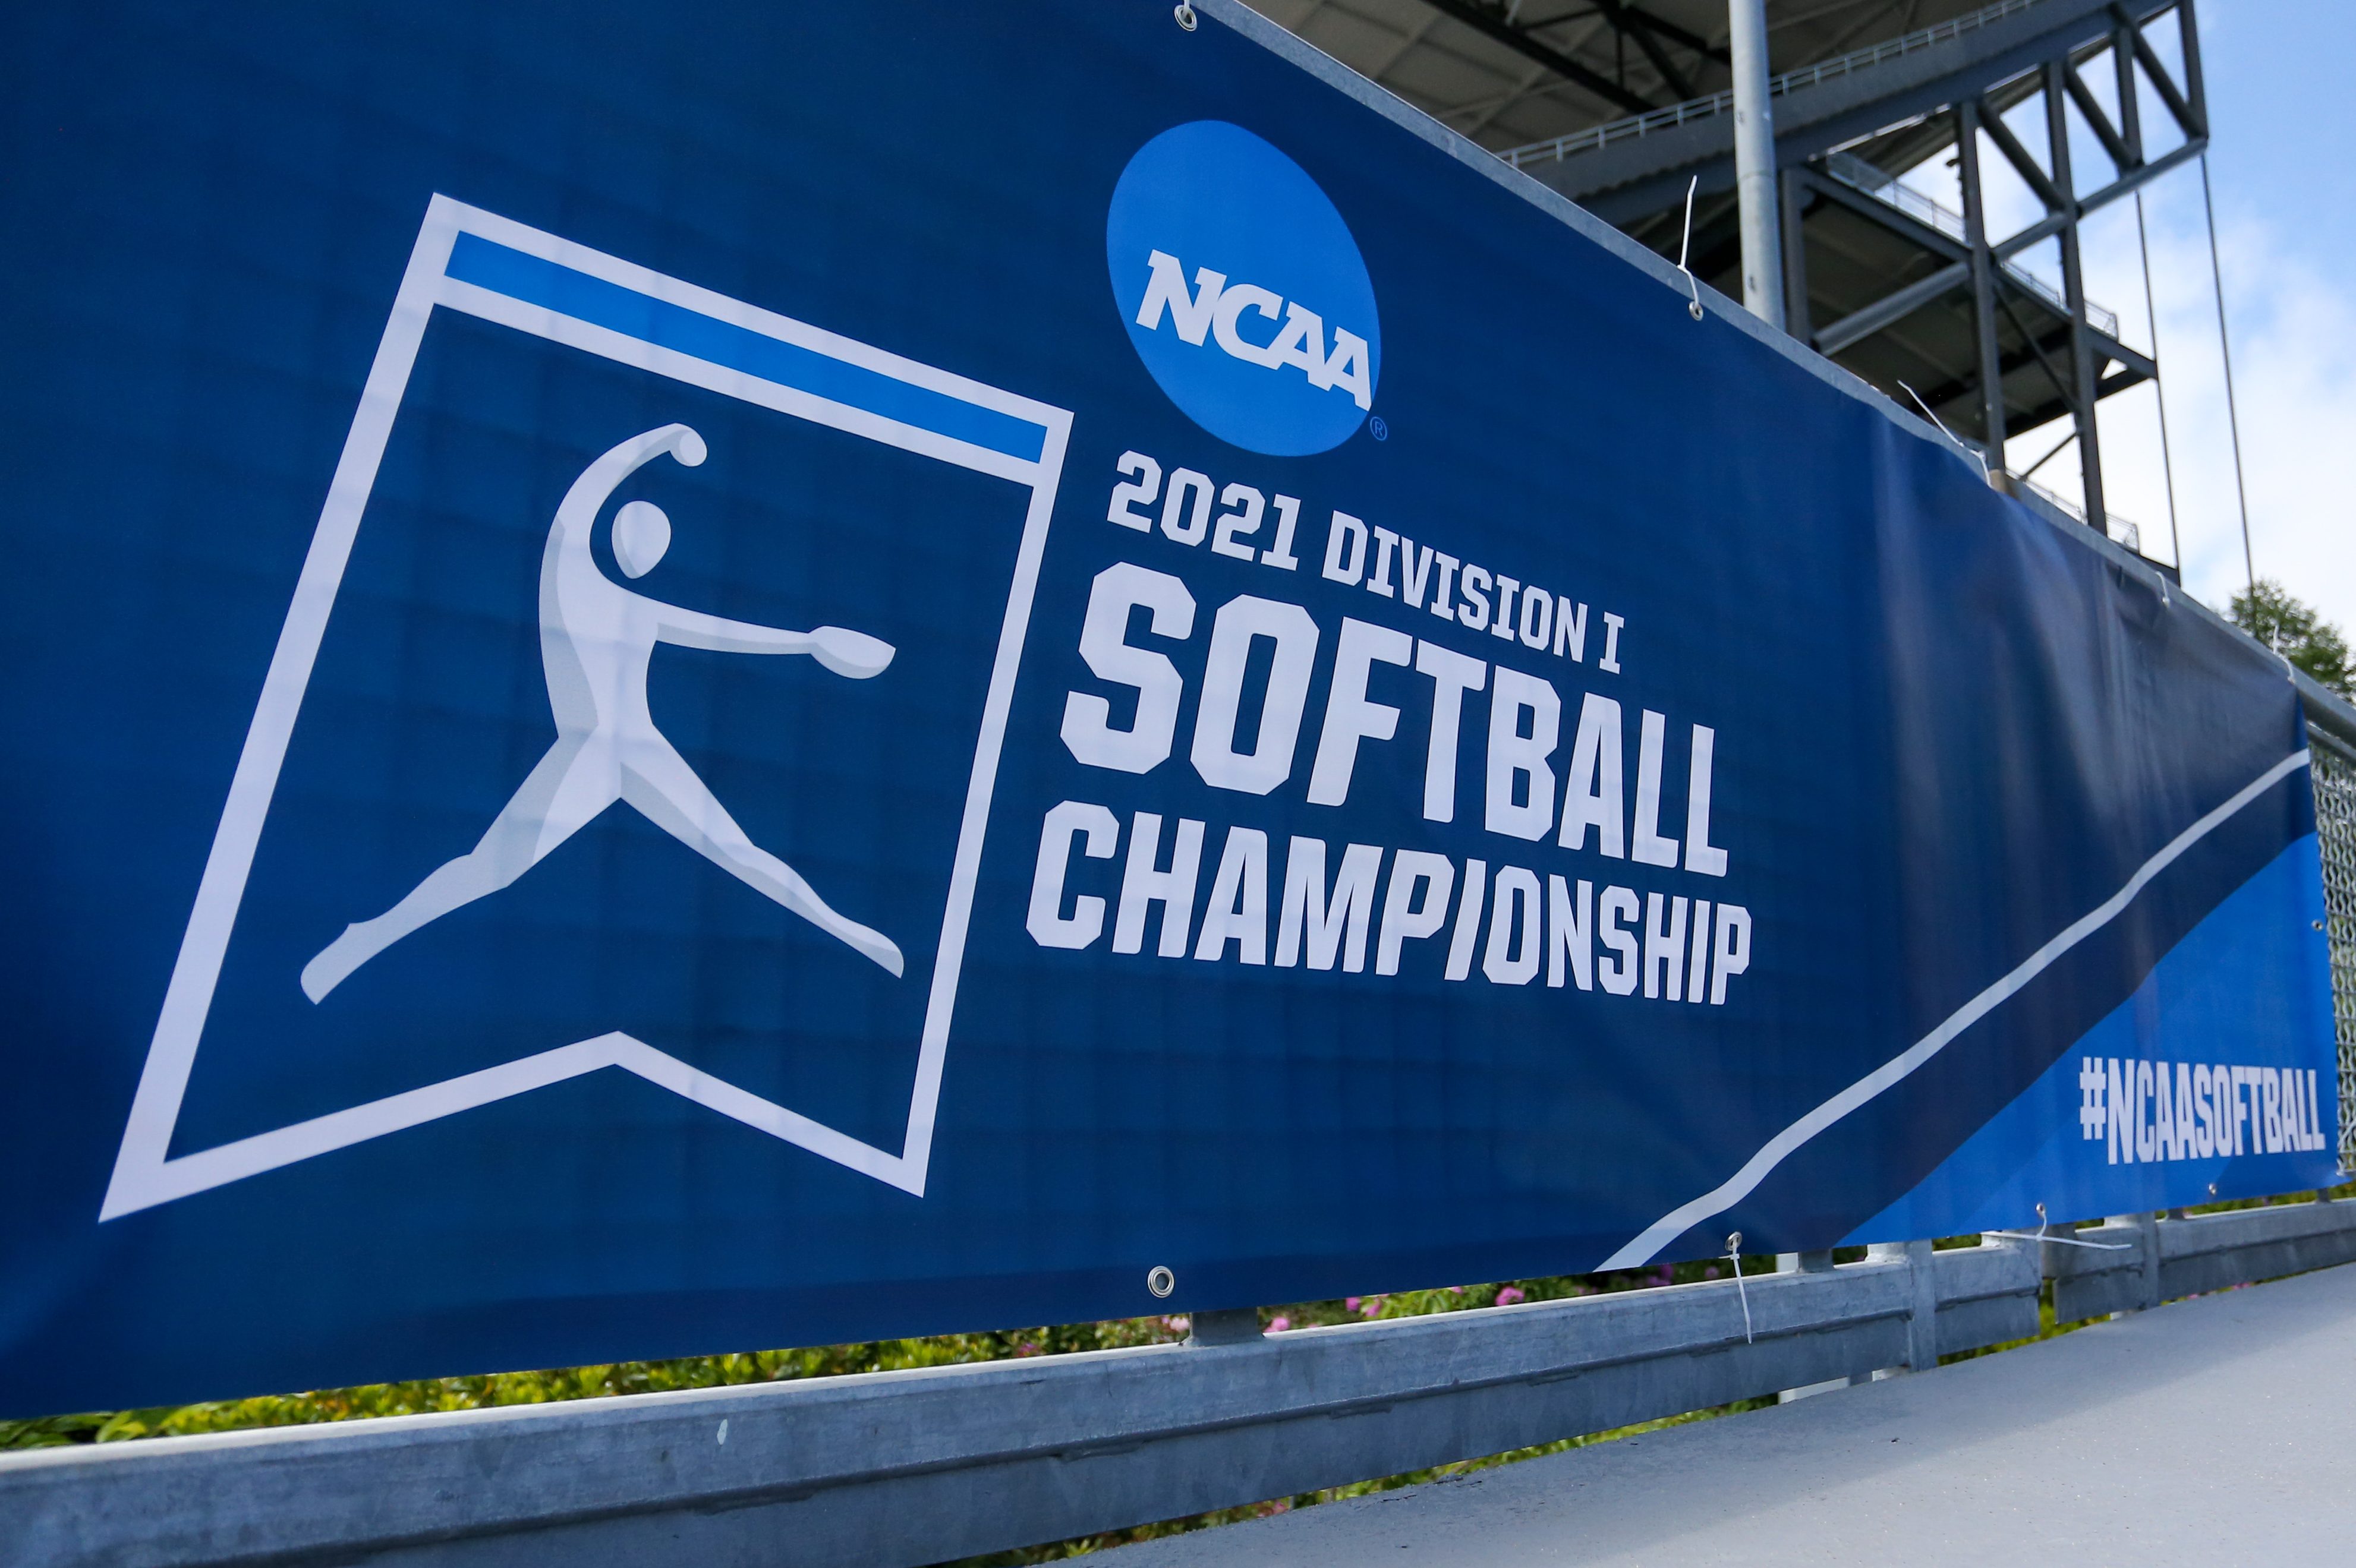 A blue and white banner for the 2021 Division I Softball Championship with the NCAA logo at a game